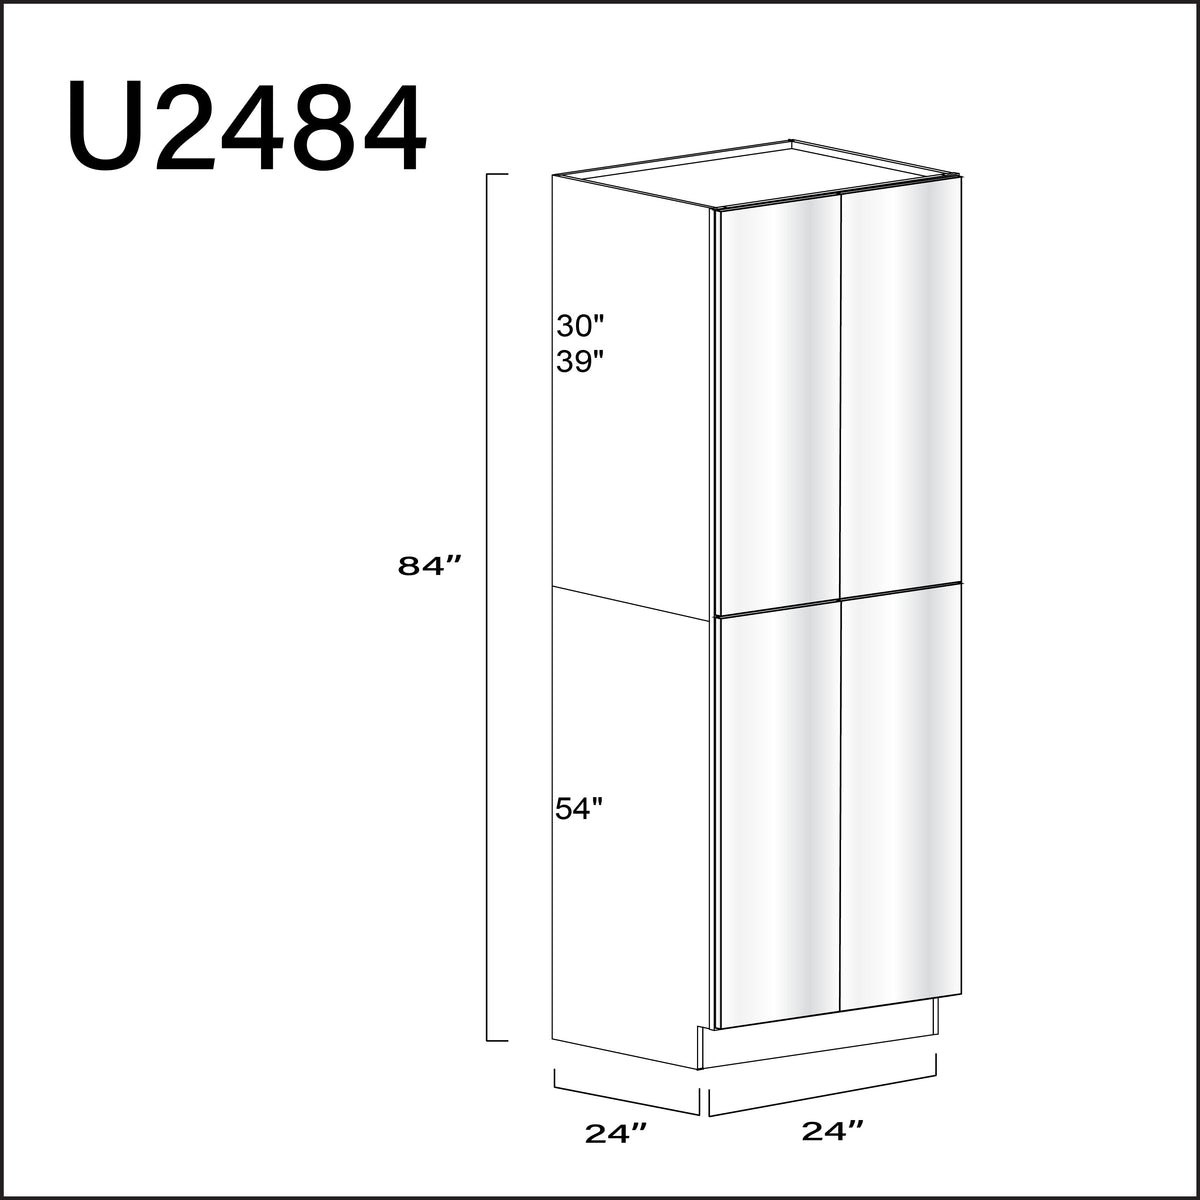 Glossy White Frameless Double Door Pantry Cabinet - 24" W x 84" H x 24" D